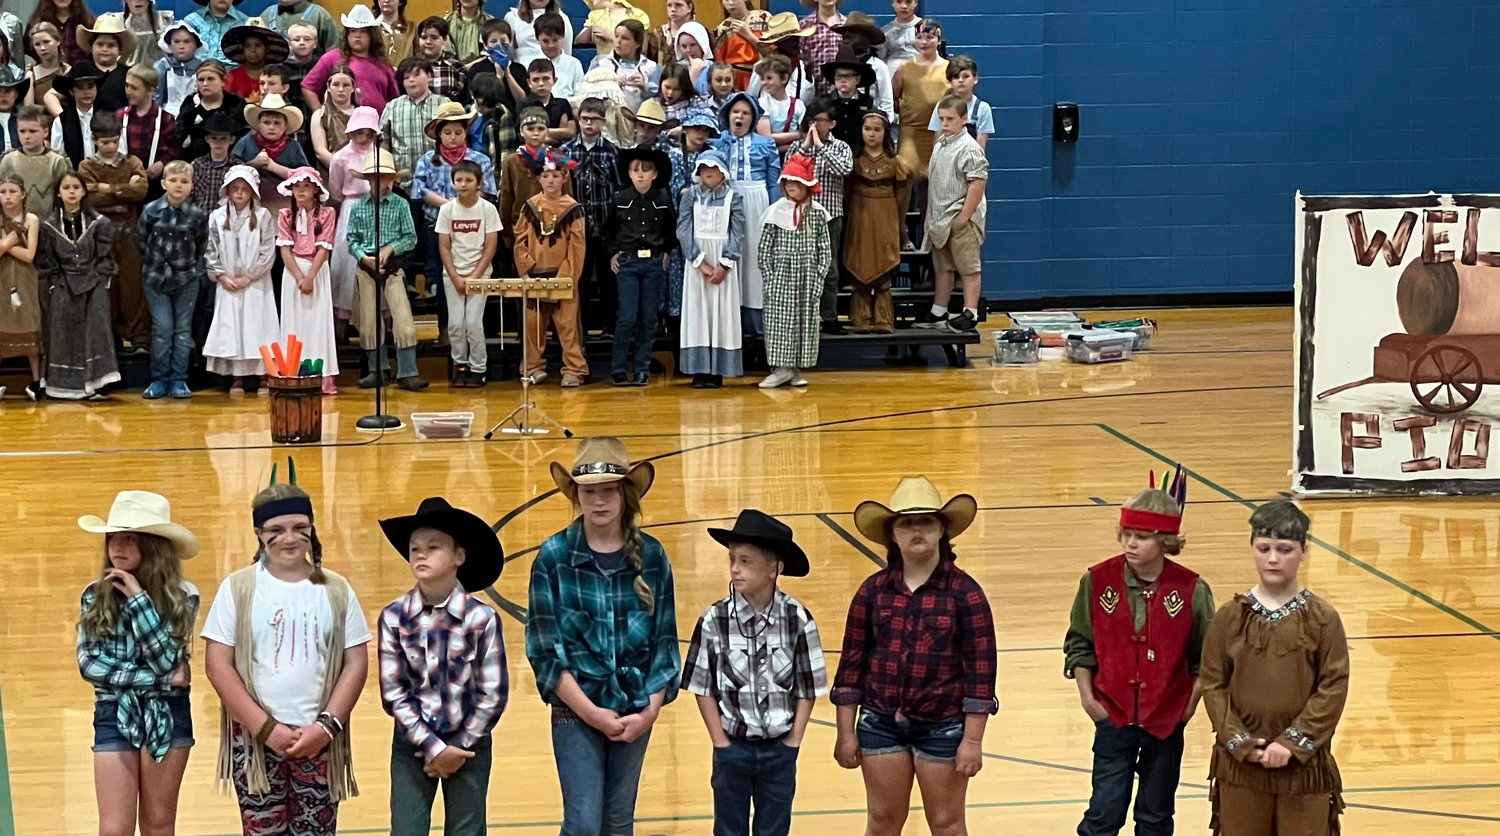 Bonnets, boots and smiles, oh my! Little cowpokes flooded Shook’s gymnasium on May 13.